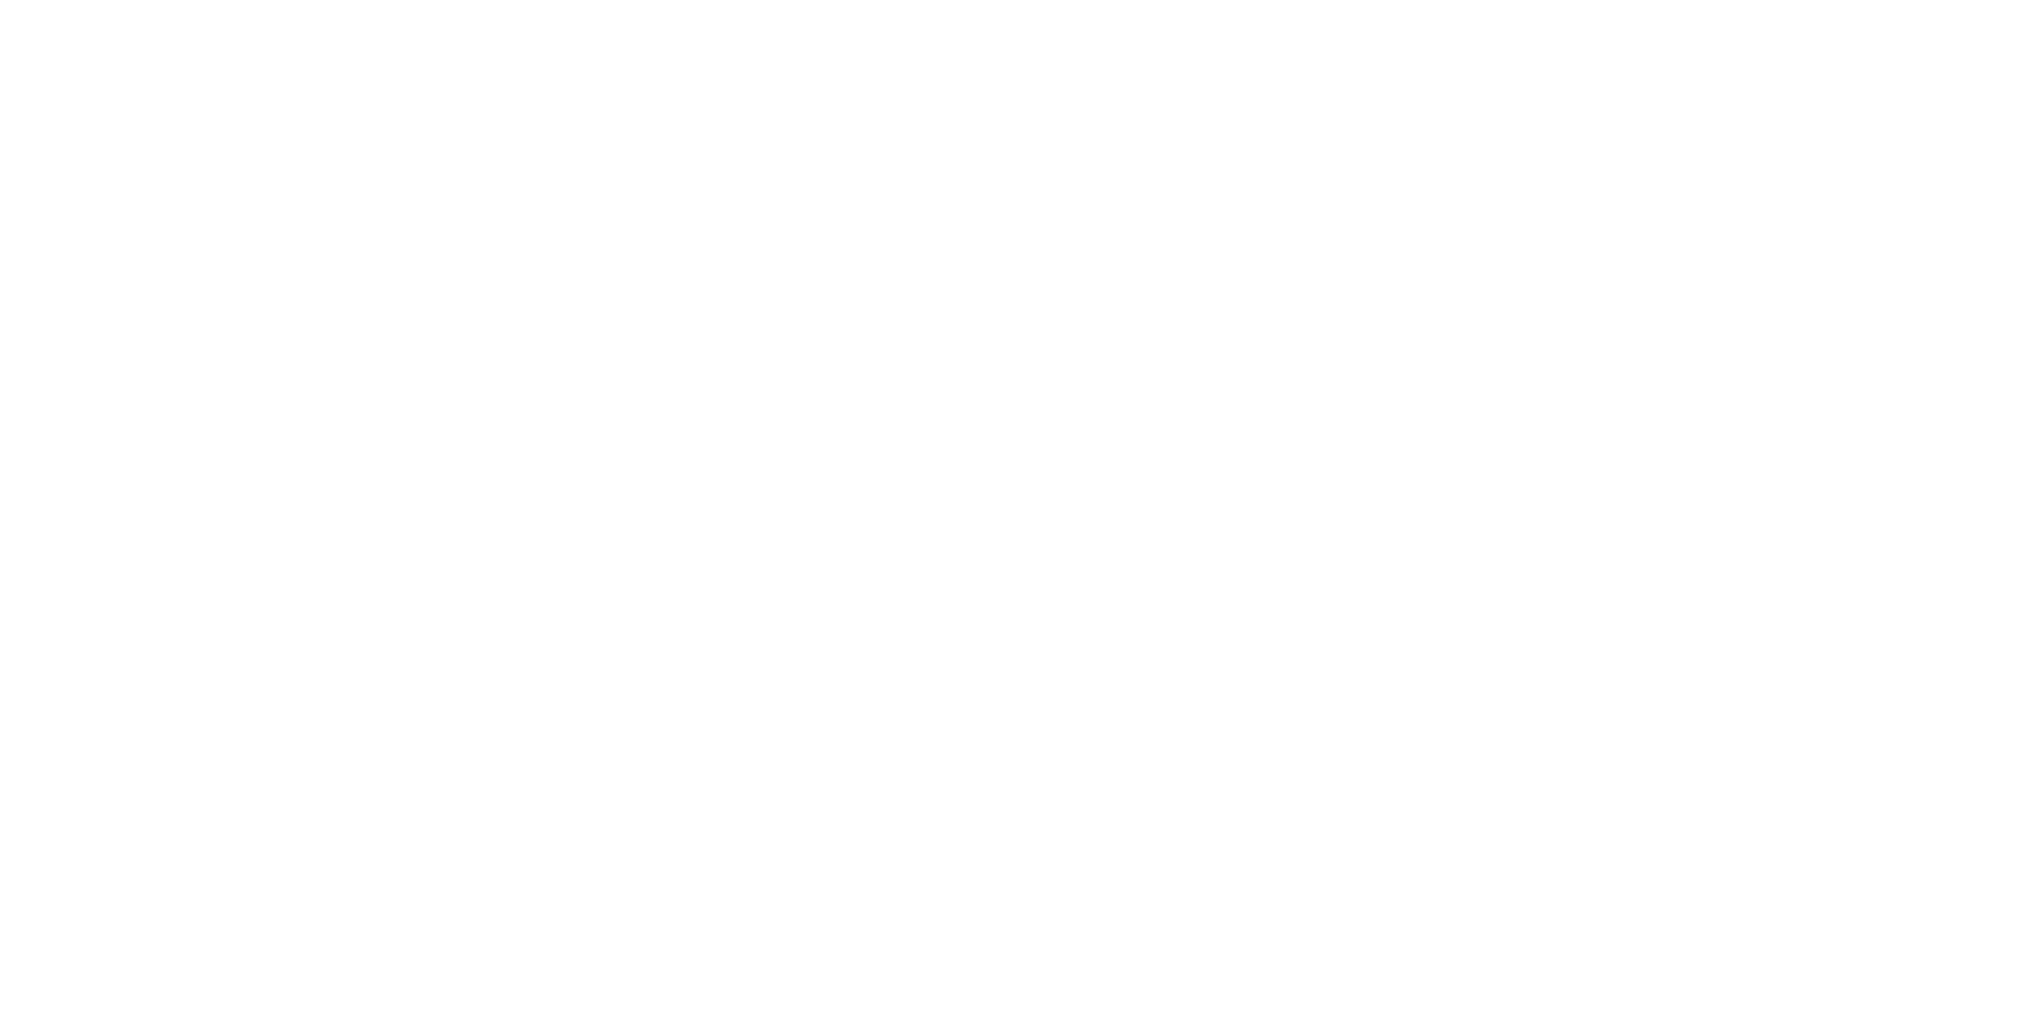 https://a.storyblok.com/f/180781/2366x1183/7660c0b25a/white_responsible-icons-dispose-correctly.png